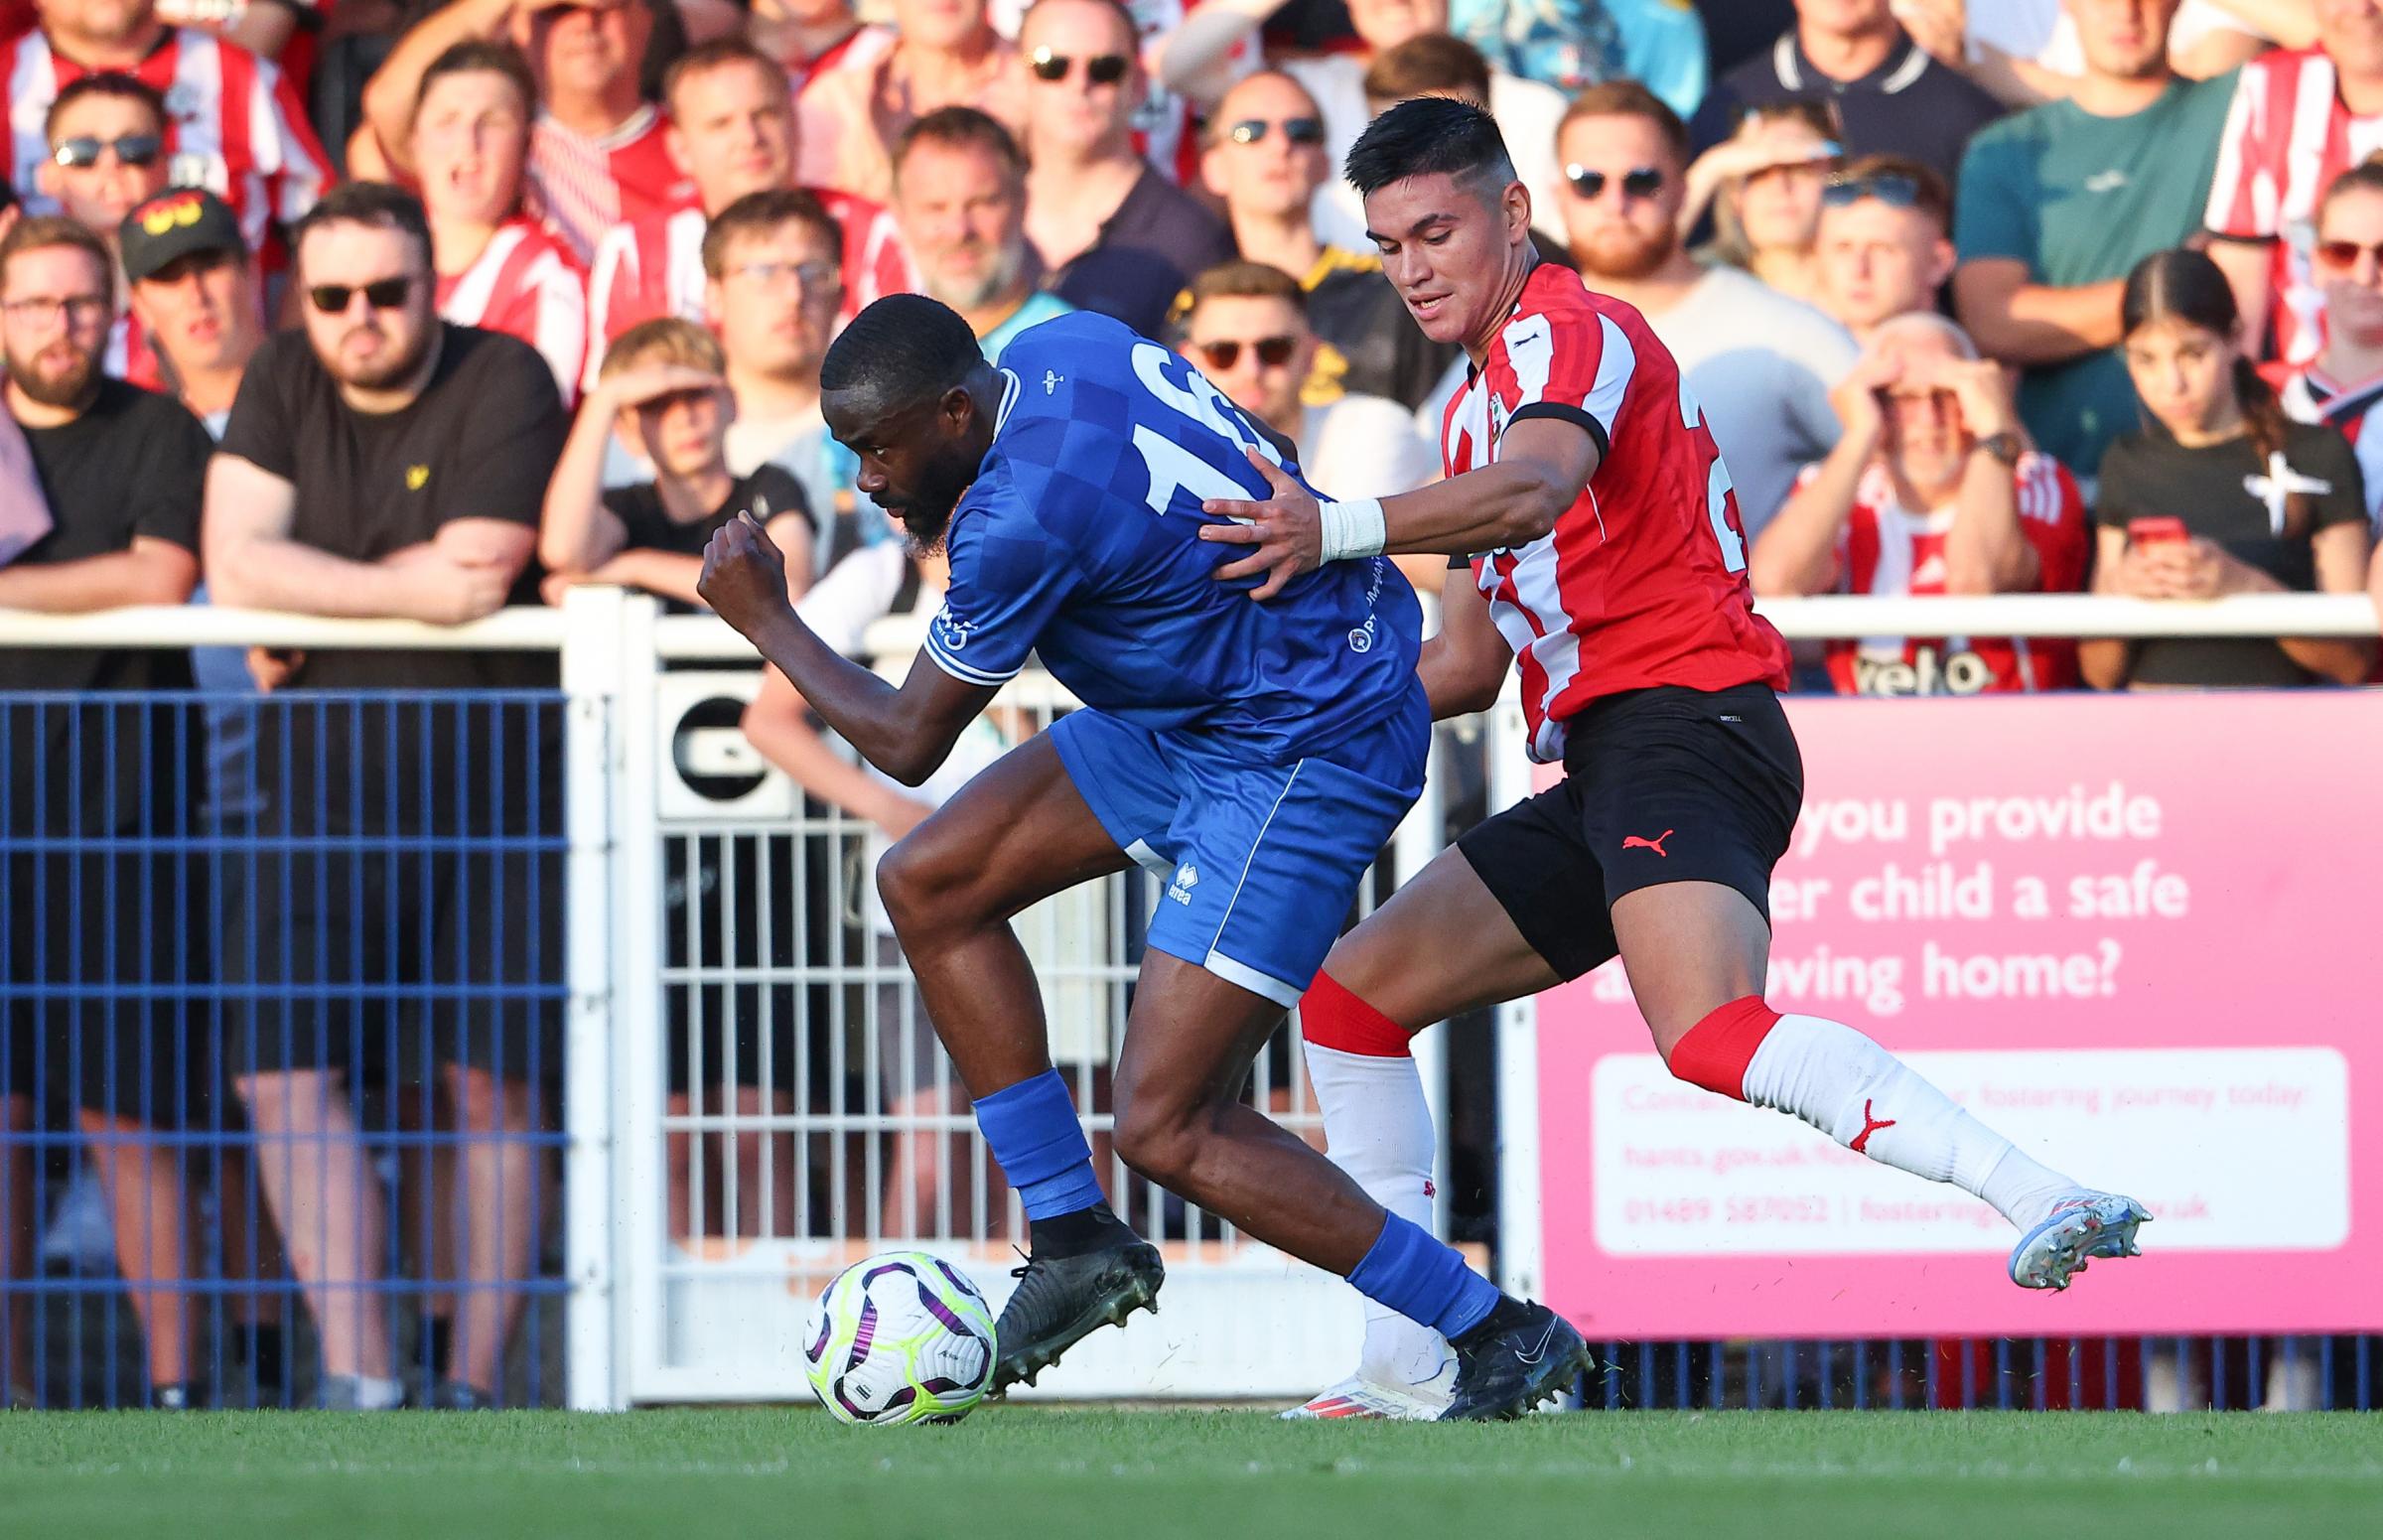 Best photos from Southampton's 7-1 win over Eastleigh in pre-season